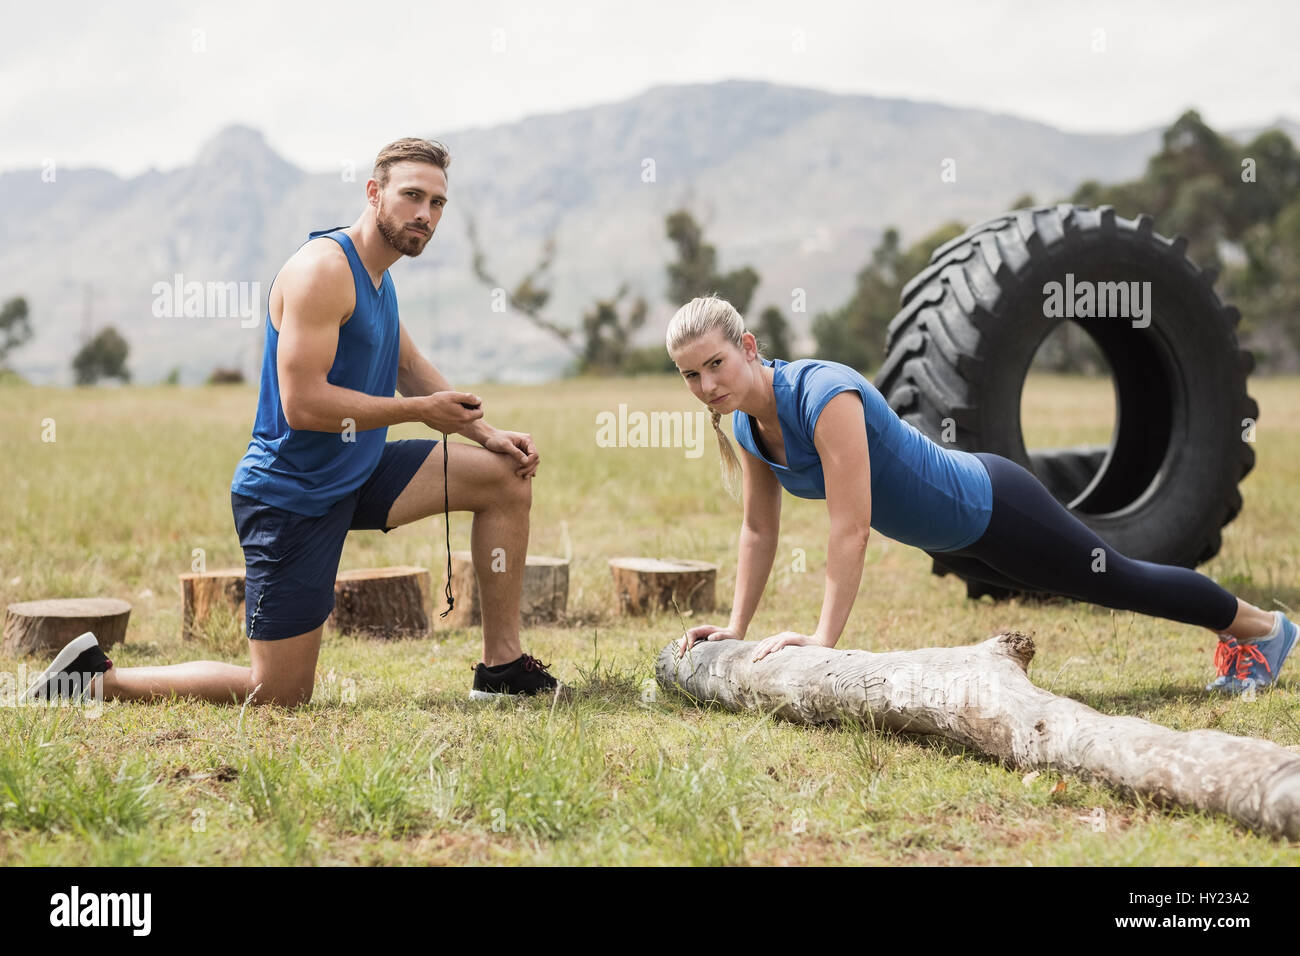 Fit performing pushup exercise while man measuring time in boot camp Stock Photo